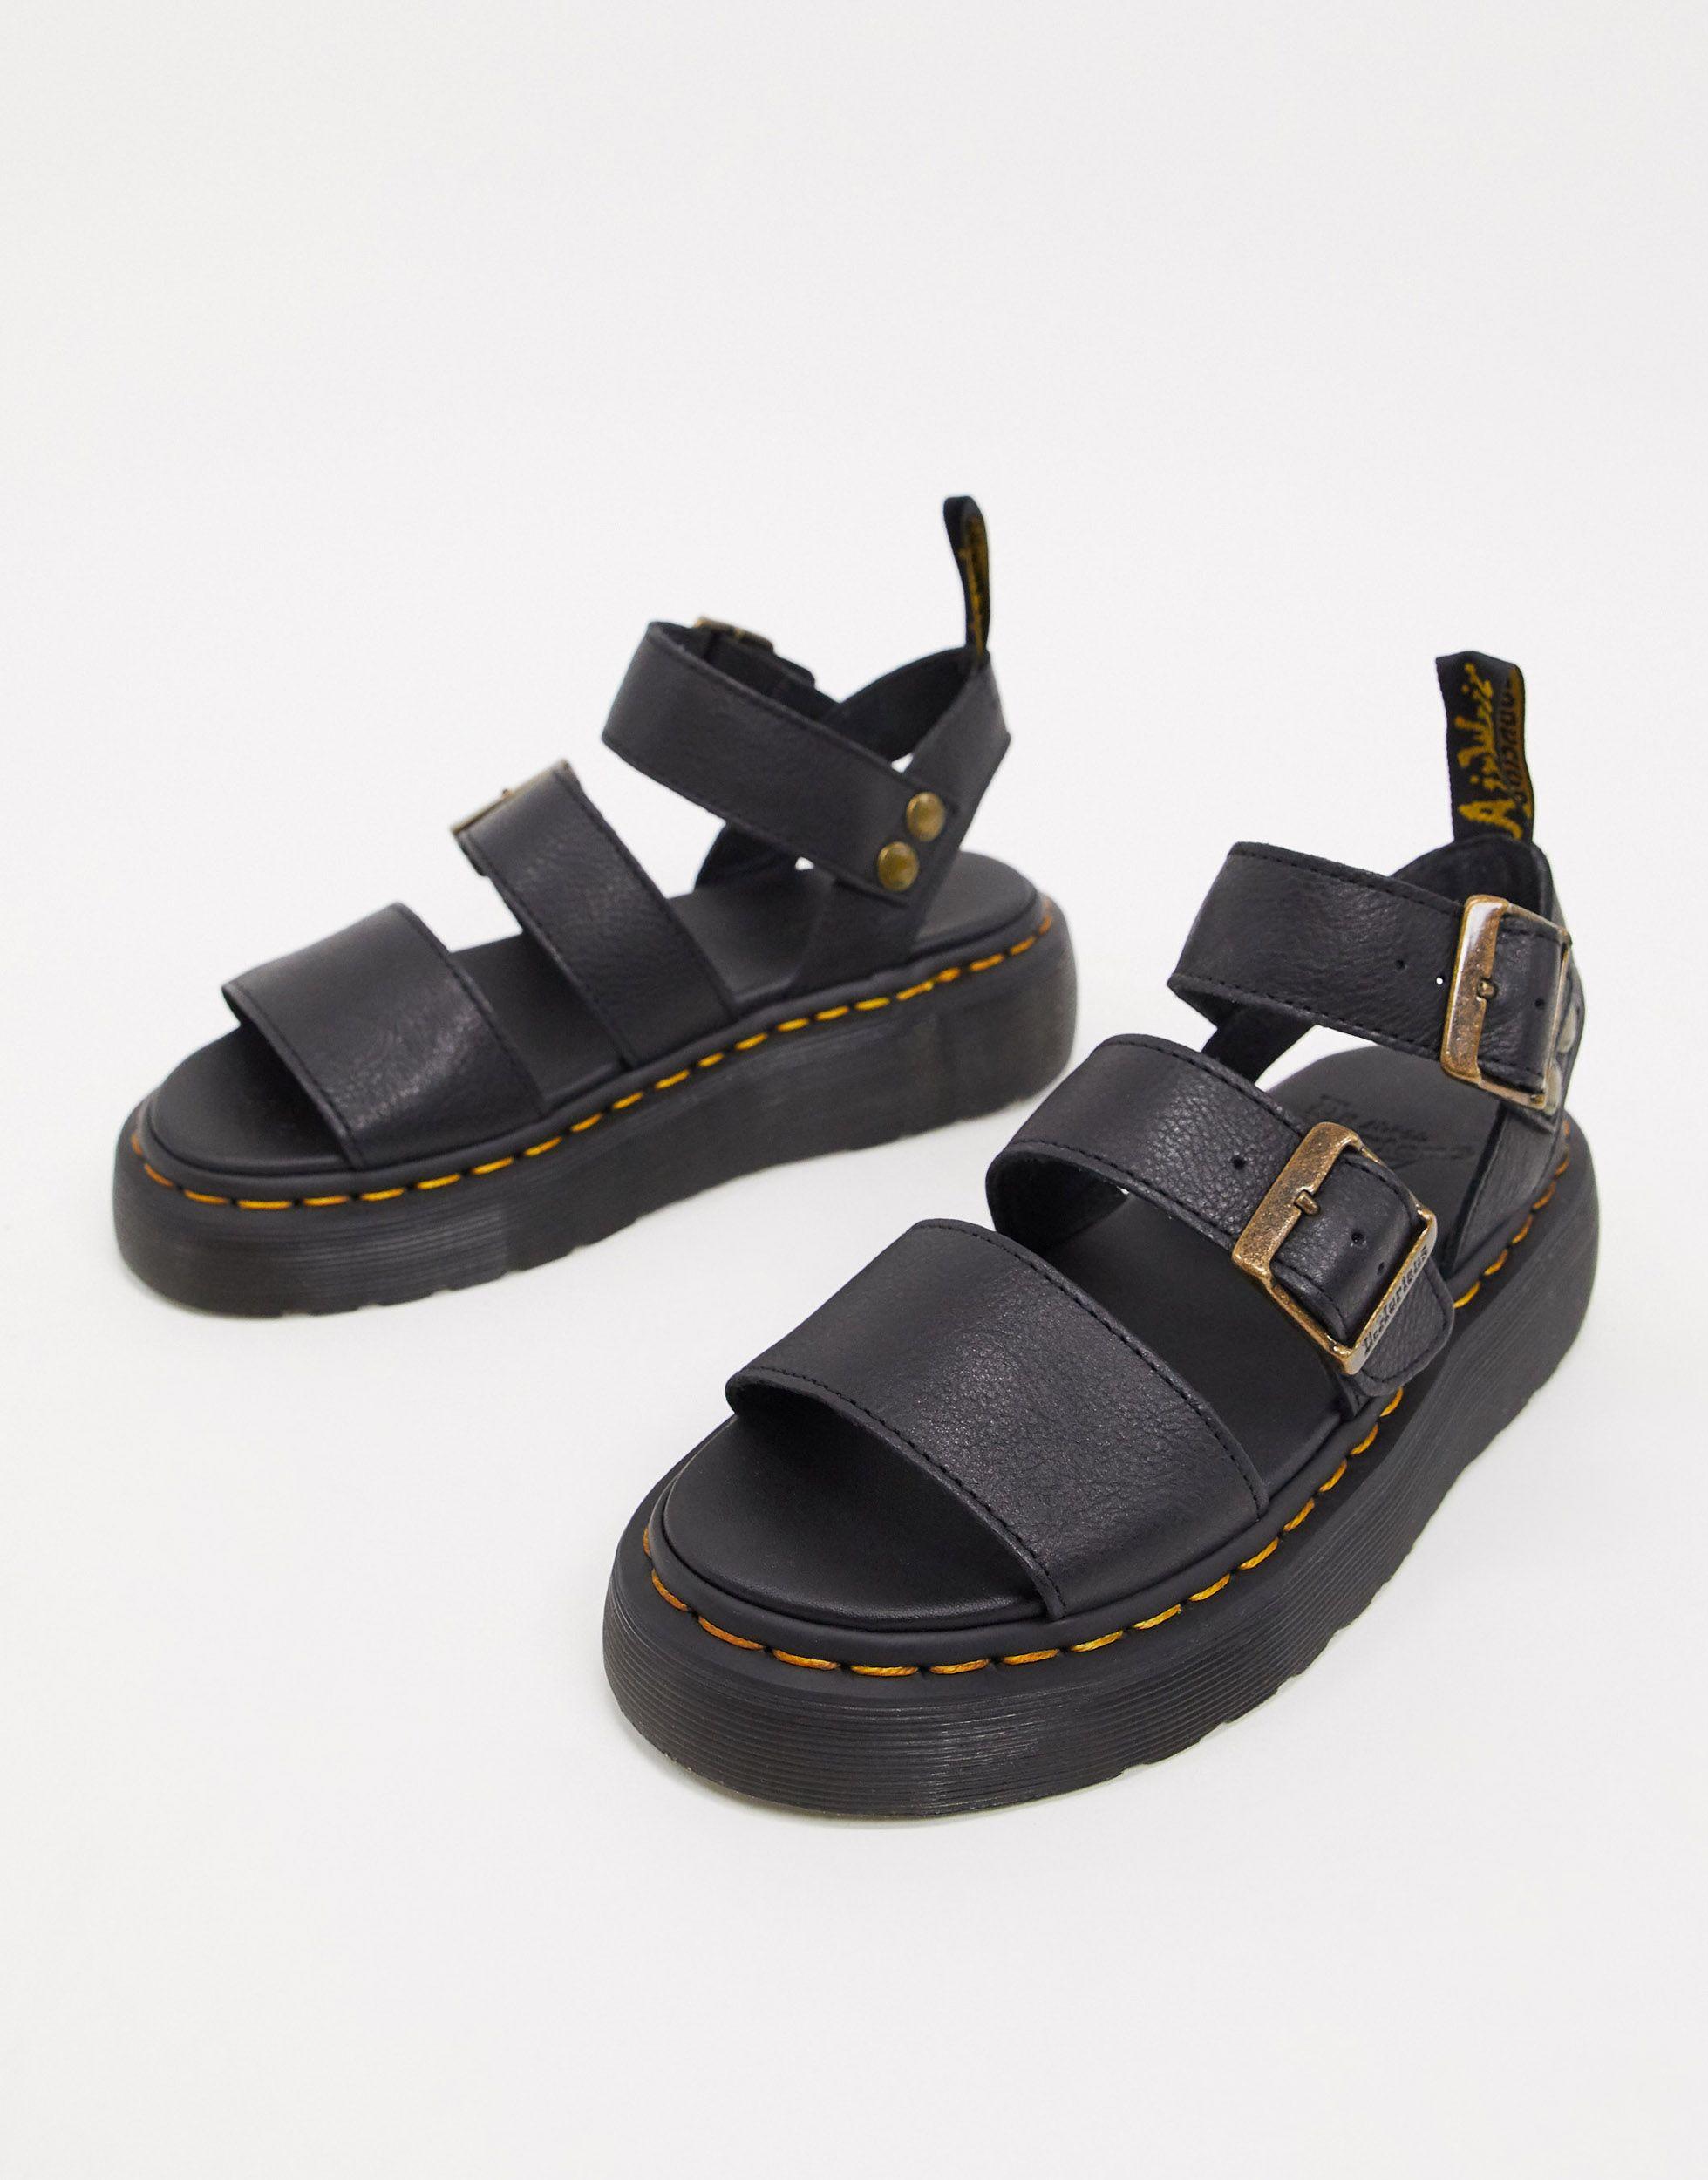 Dr. Martens Gryphon Quad Leather Chunky Sandals With Gold Hardware in Black  | Lyst